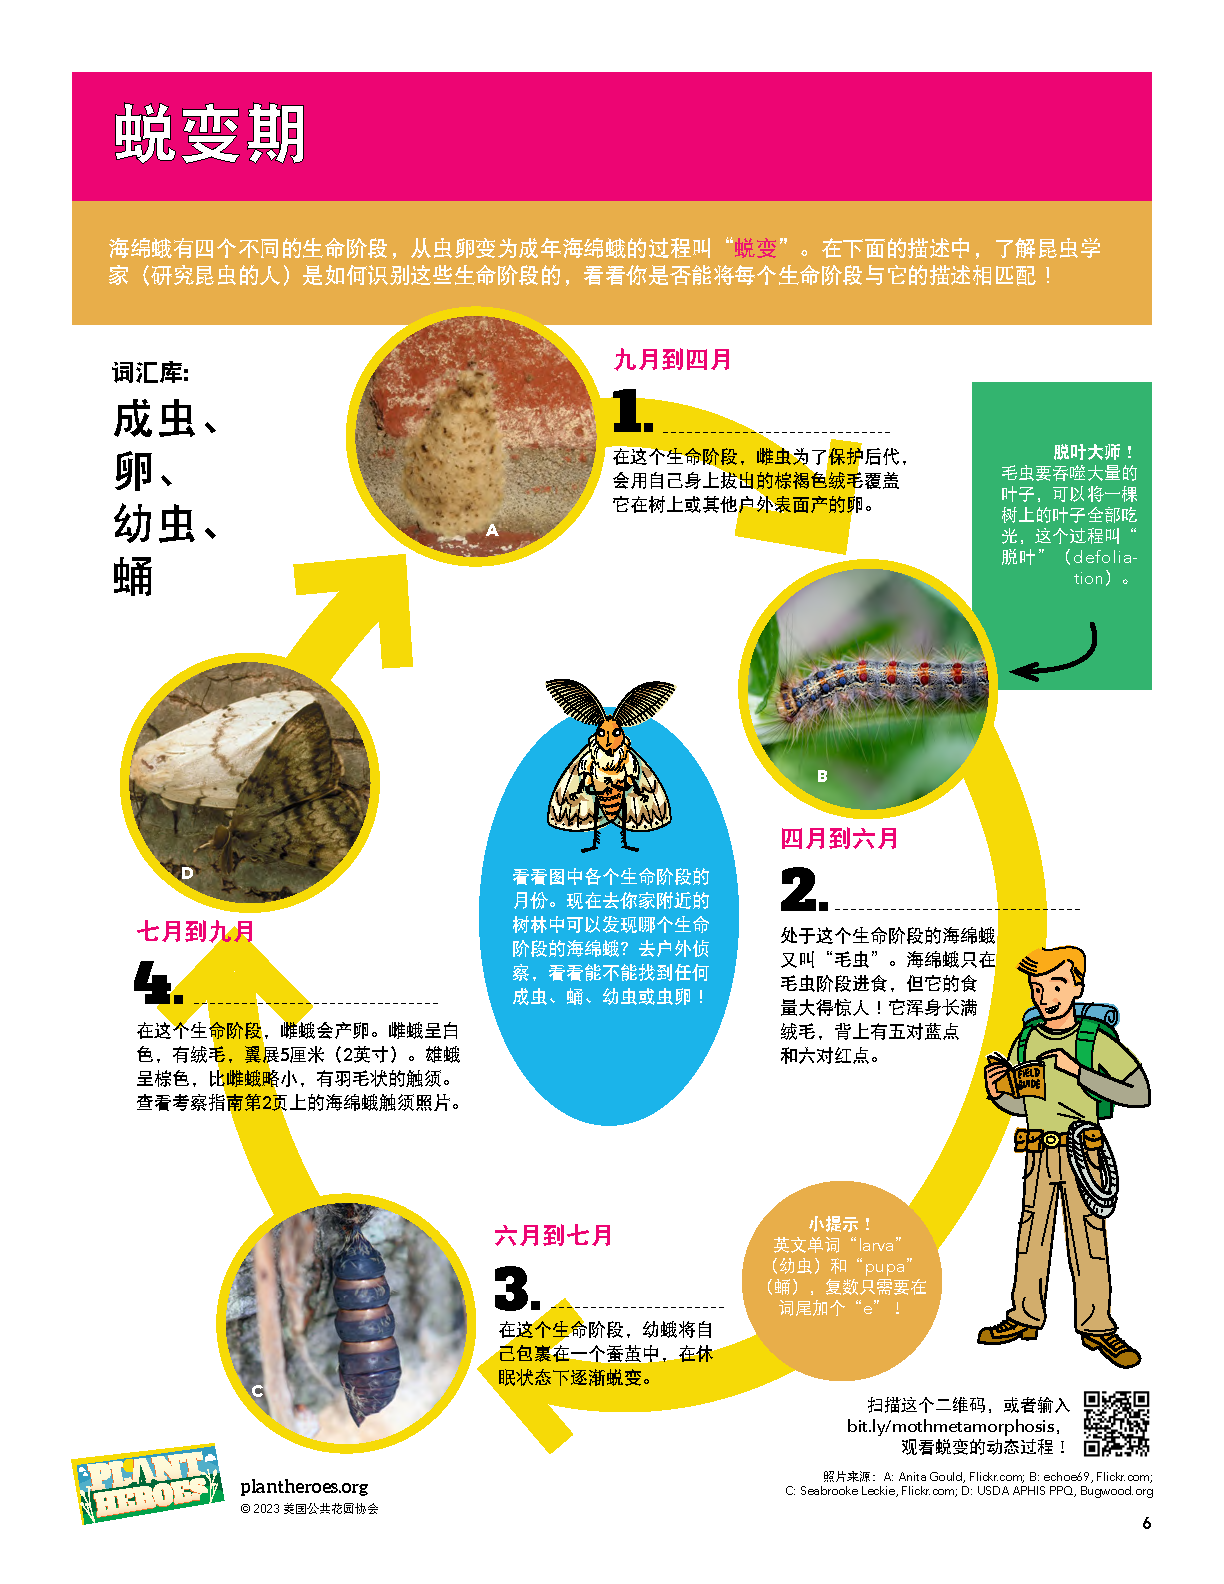 pictures of the life cycle of the spongy moth with egg, caterpillars, pupa and adult